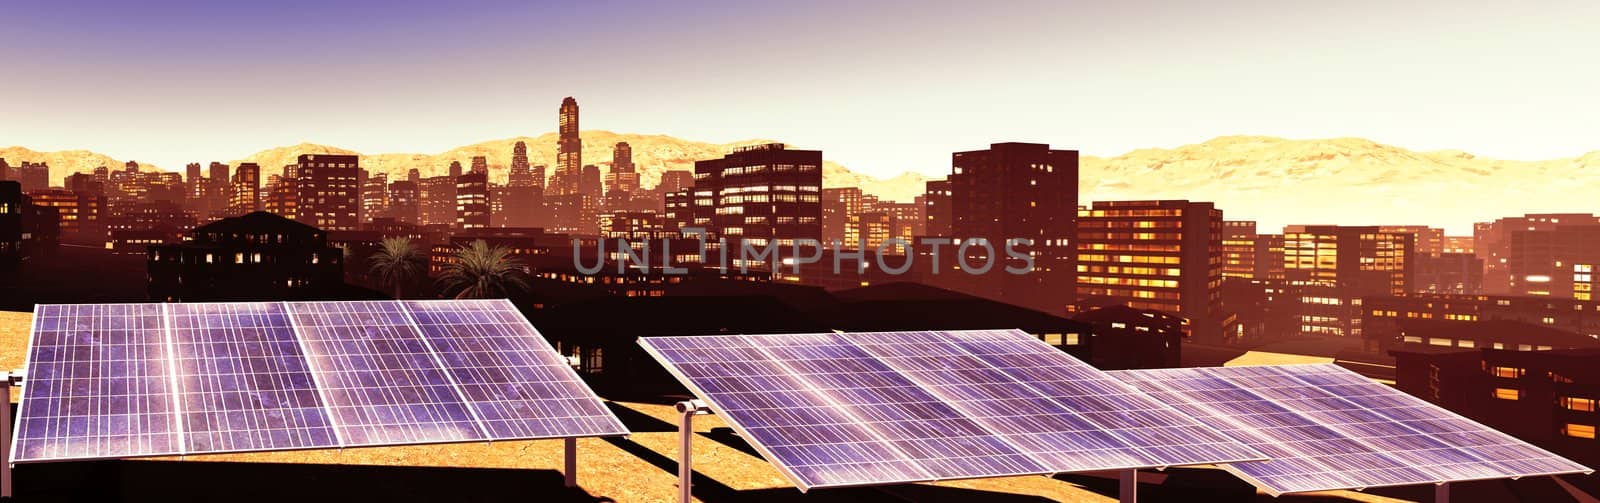 Solar power panels in city by andromeda13